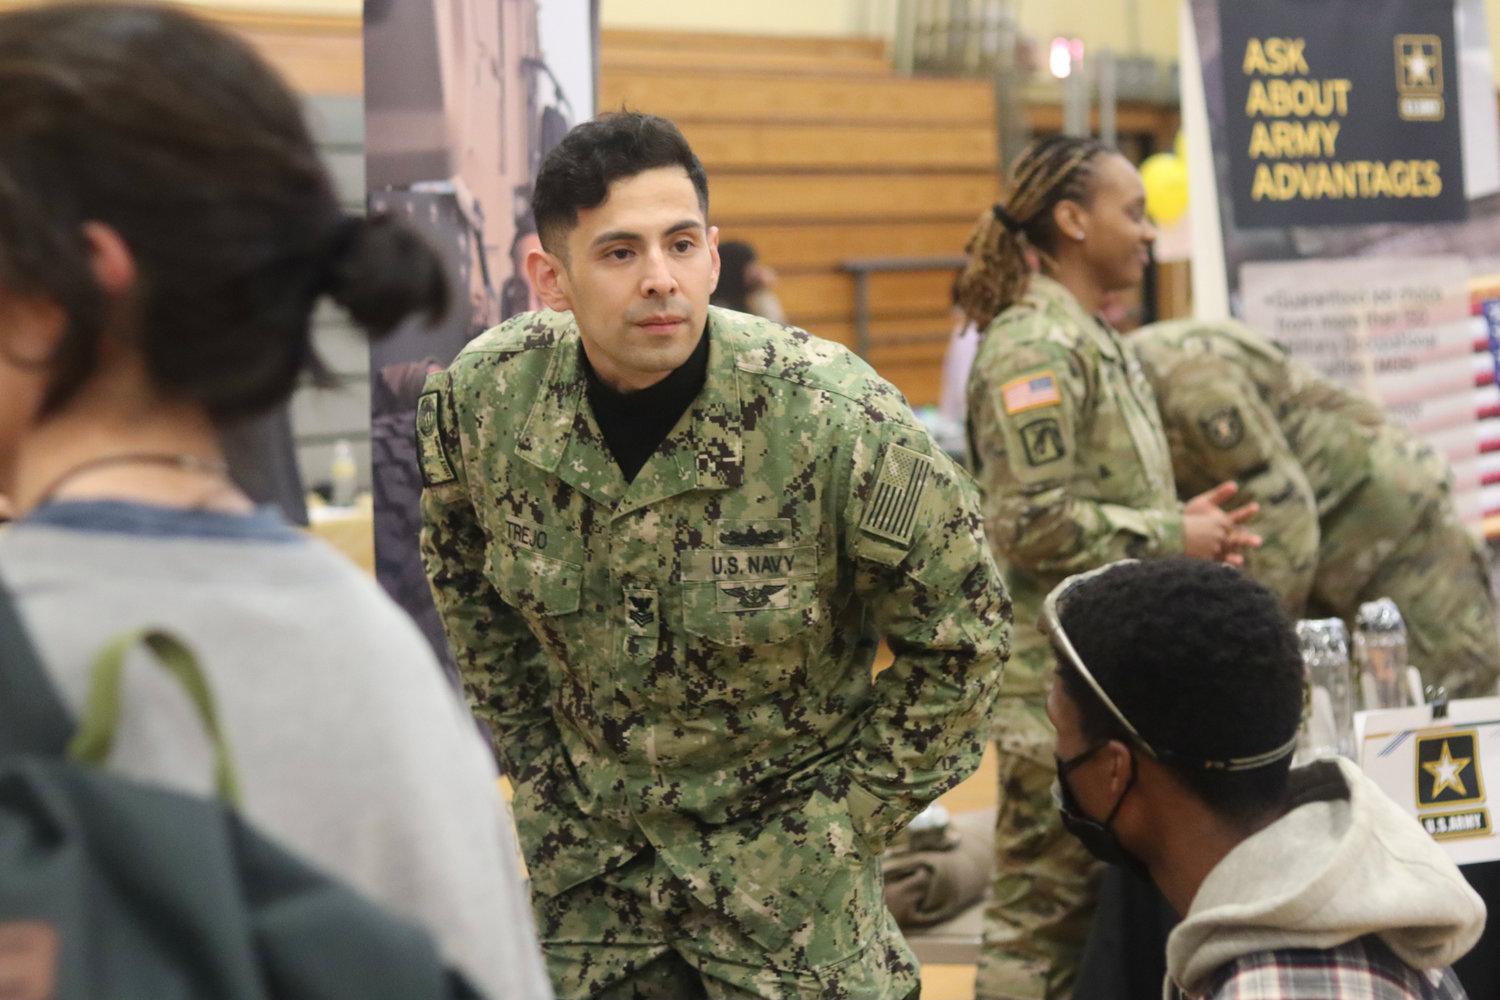 Recruiters explained the options available in military careers.